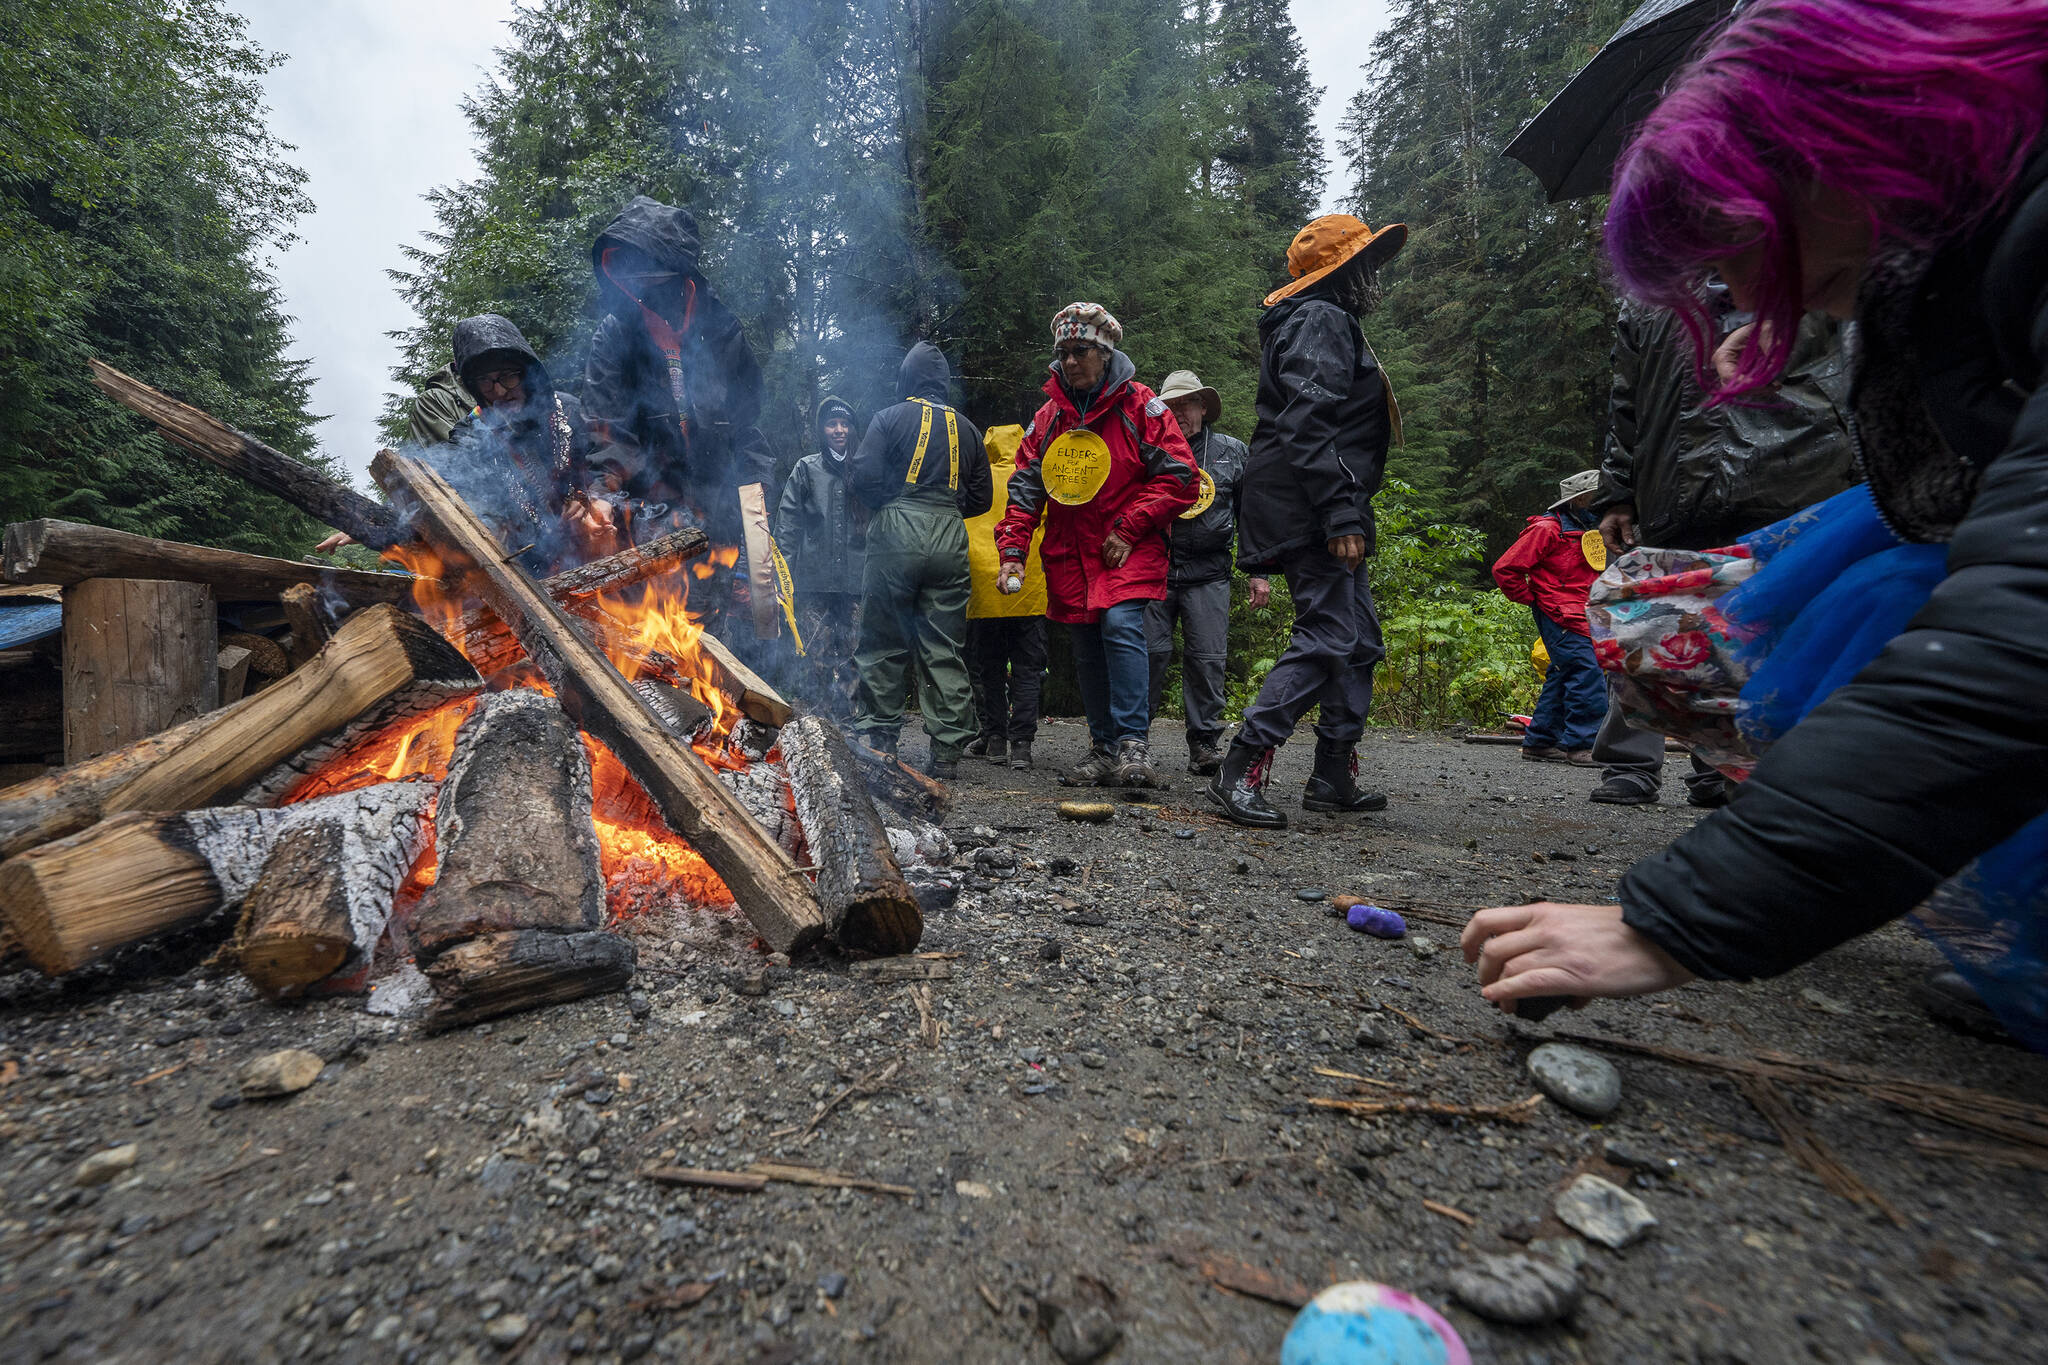 Elders for Ancient Forests along with people declaring themselves “land defenders” take part in a peace circle along a logging road in the Fairy Creek logging area near Port Renfrew, B.C. Tuesday, Oct. 5, 2021. THE CANADIAN PRESS/Jonathan Hayward